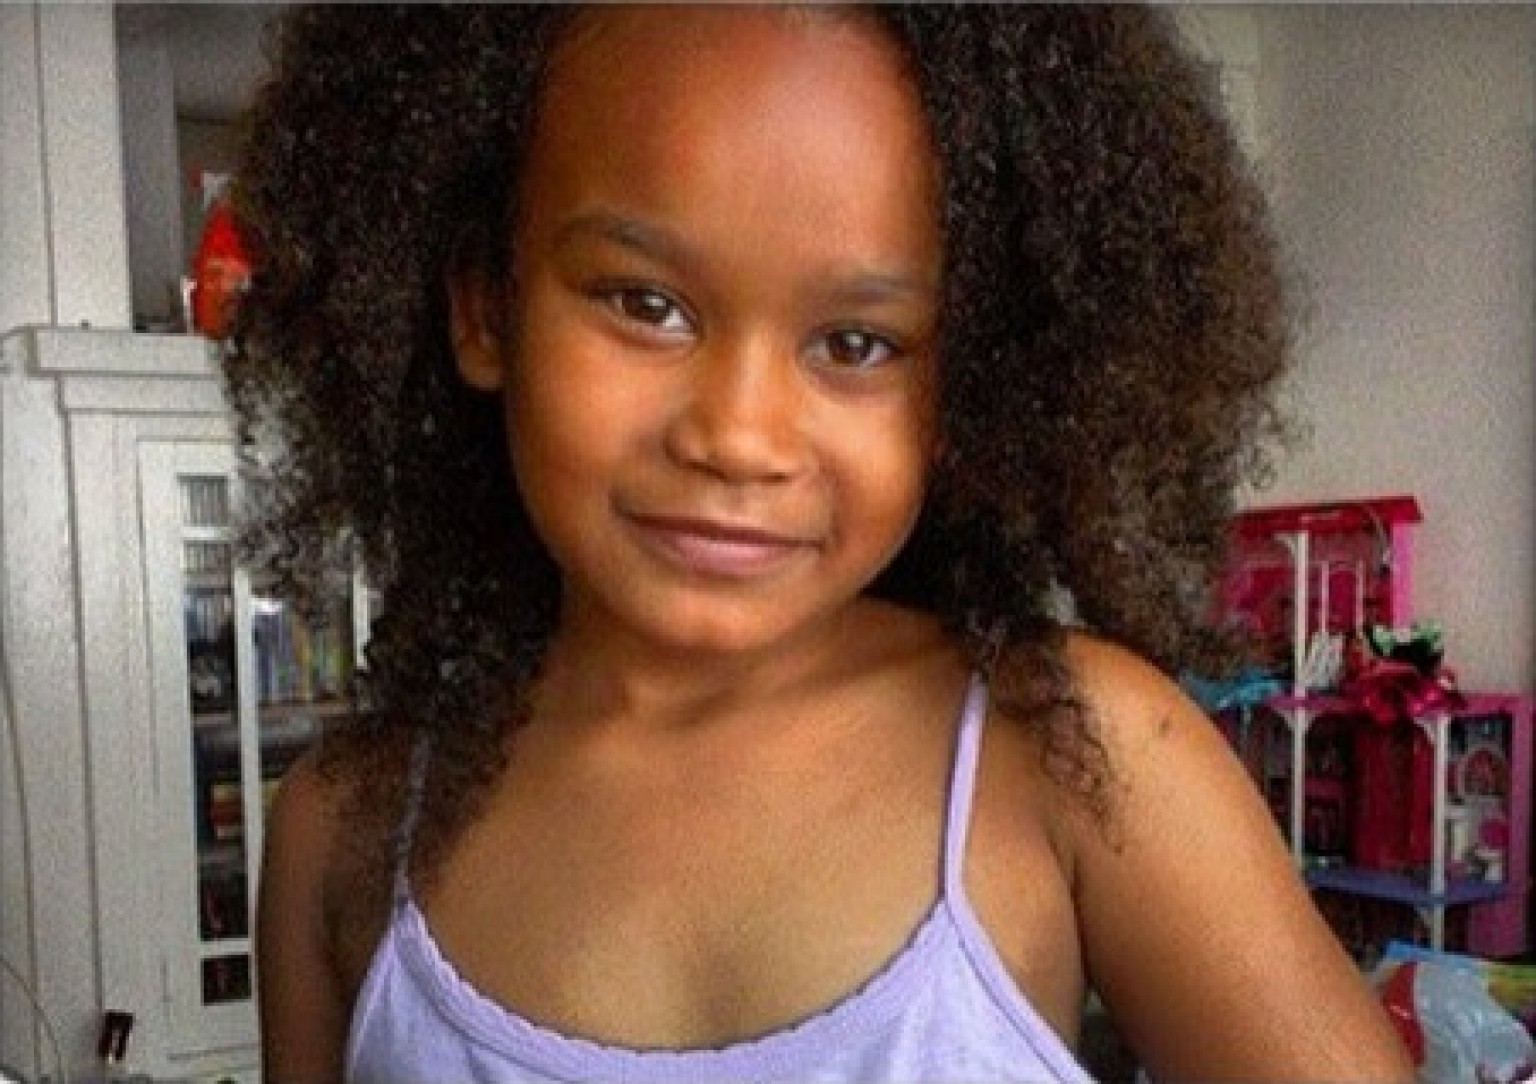 6-Year-Old Girl Fatally Shot In Gang Violence Prompts Donations From